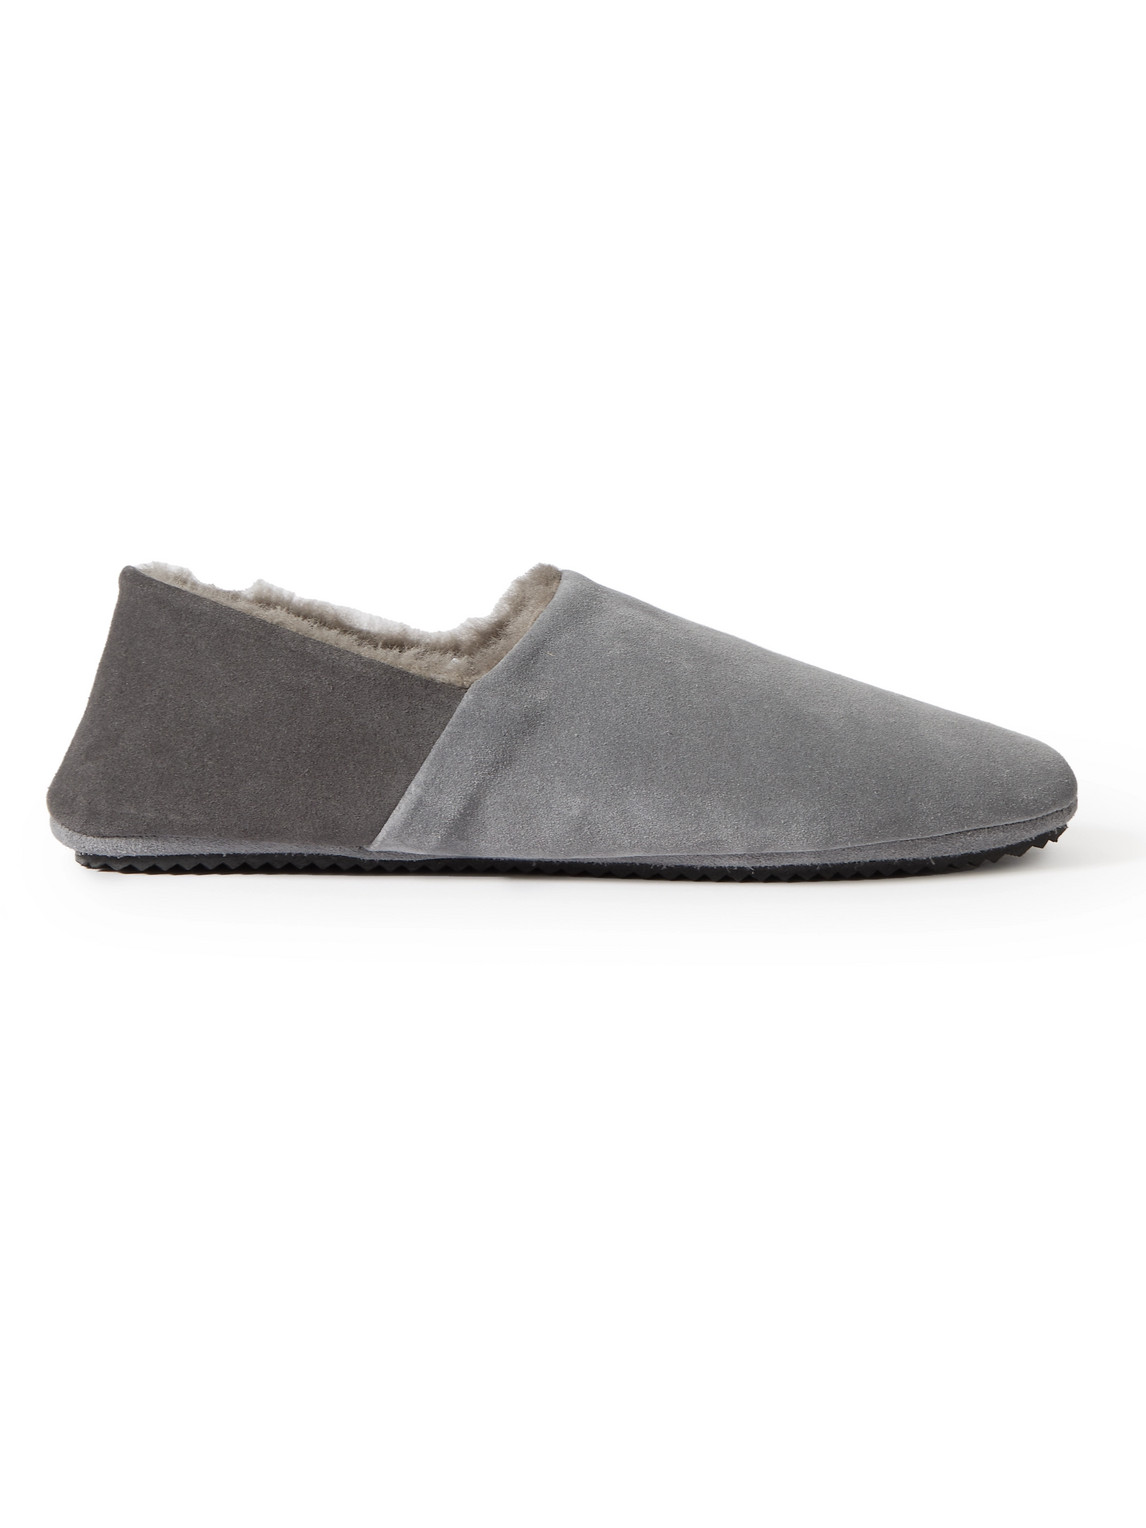 Mr P. - Babouche Shearling-Lined Suede Slippers - Men - Gray - UK 10 von Mr P.